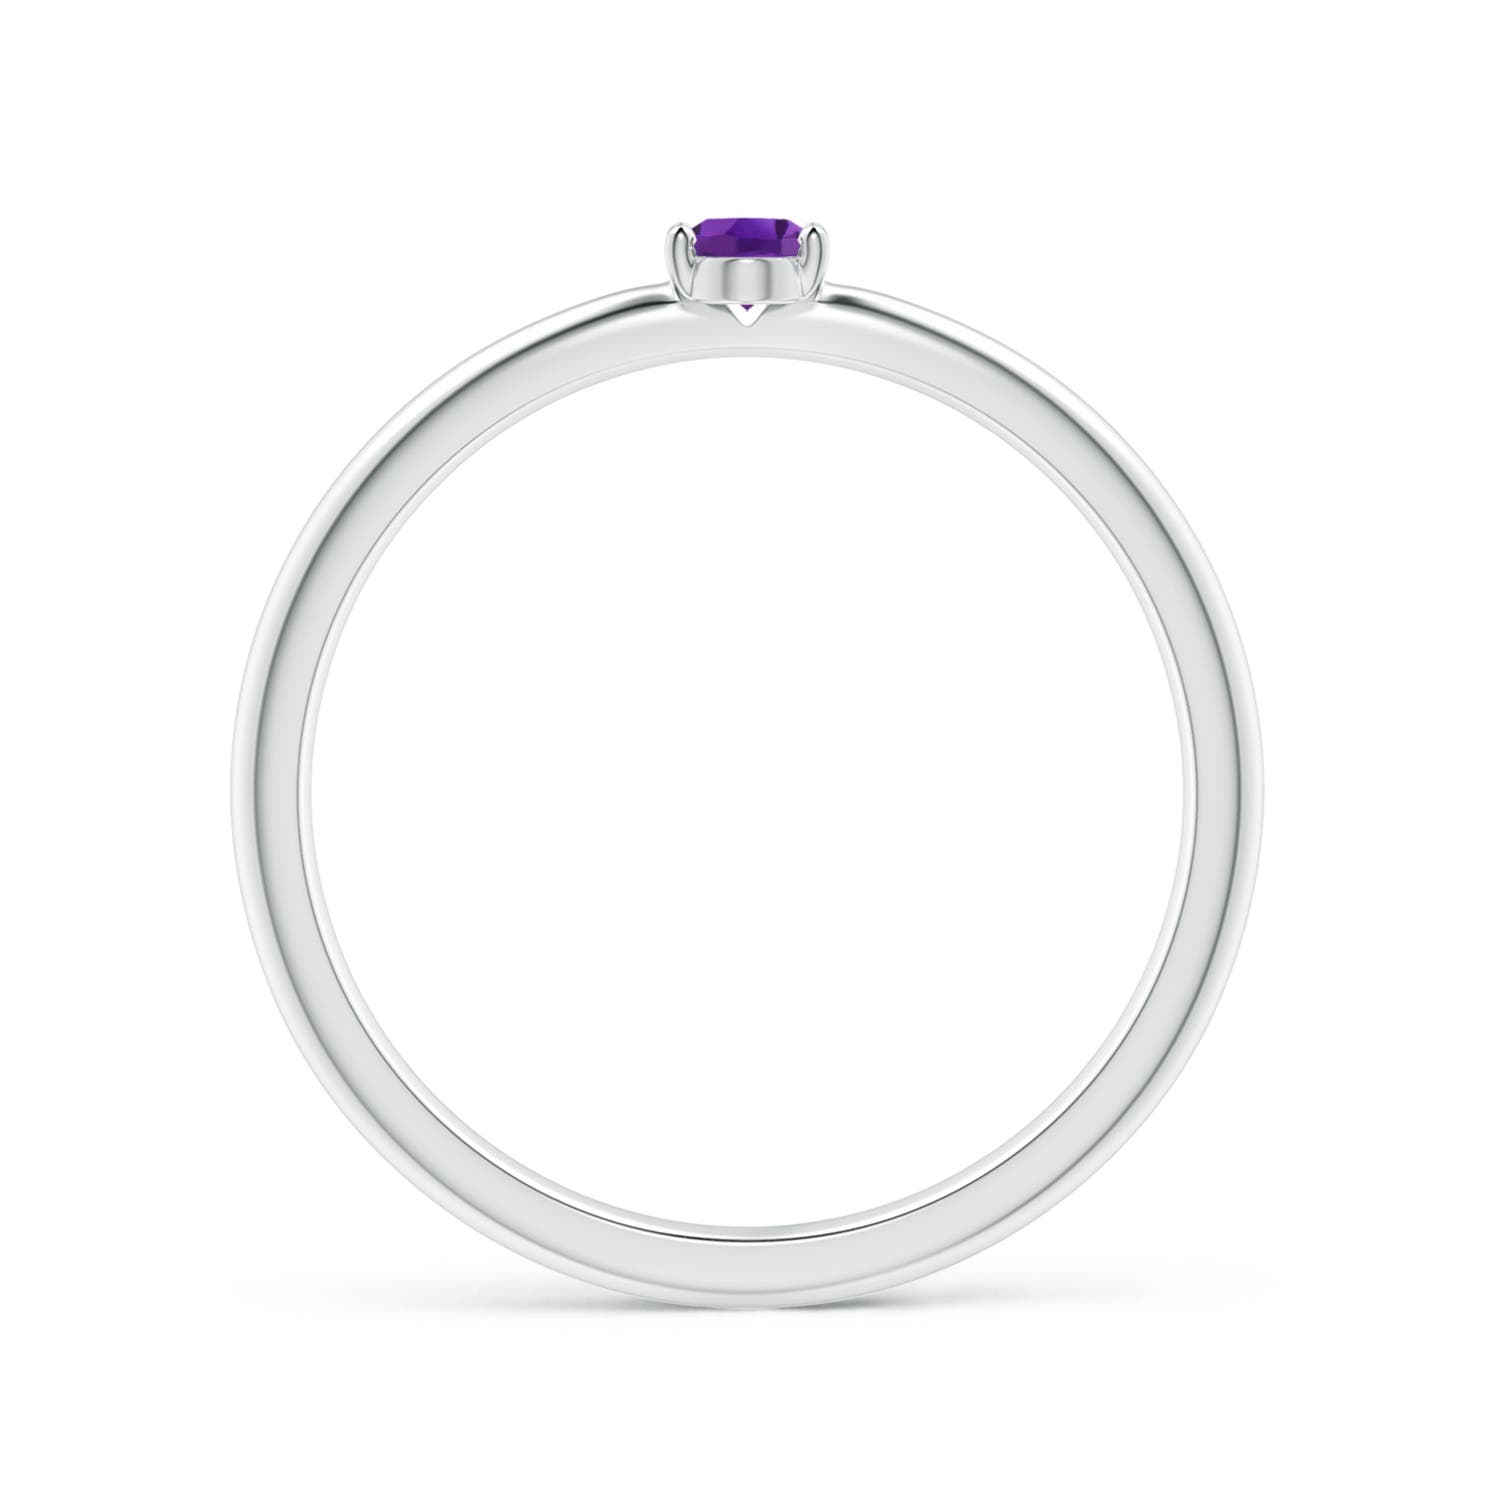 AAA - Amethyst / 0.14 CT / 14 KT White Gold